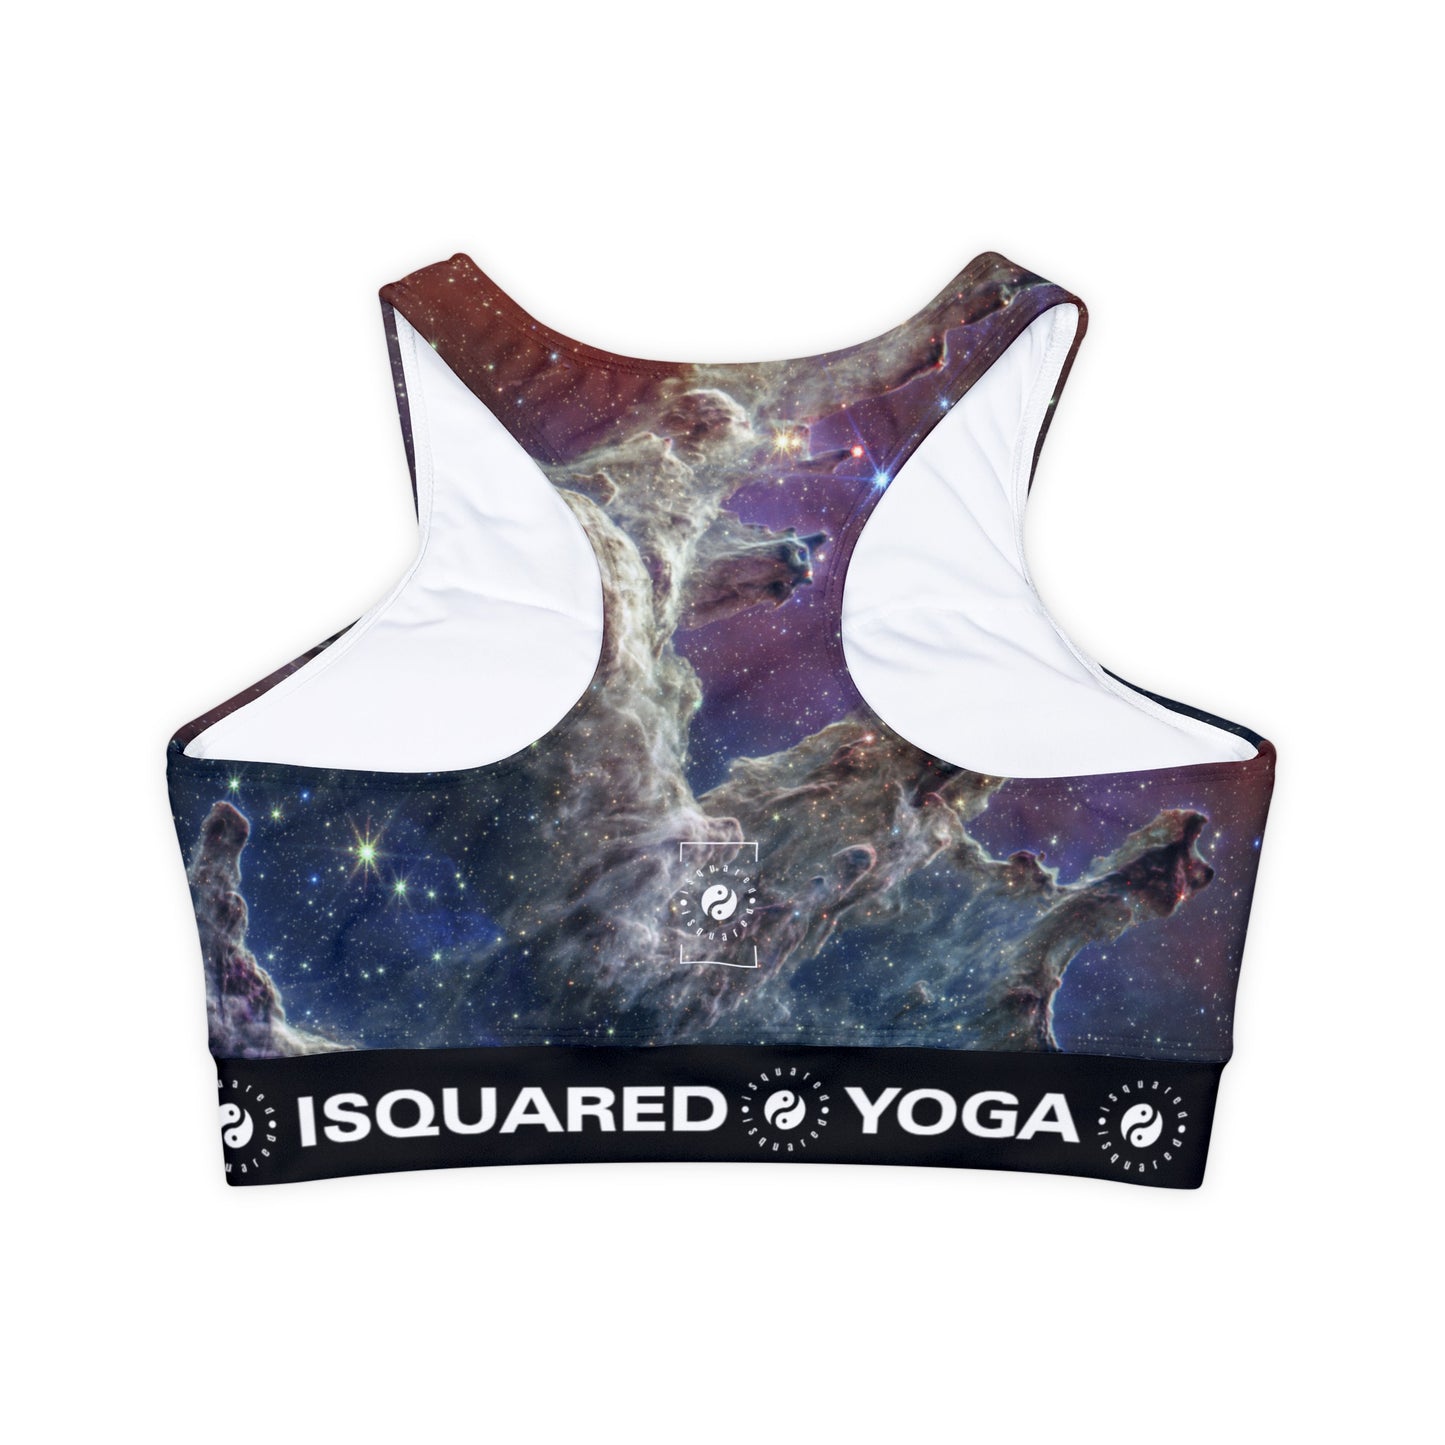 Pillars of Creation (NIRCam and MIRI Composite Image) - JWST Collection - Lined & Padded Sports Bra